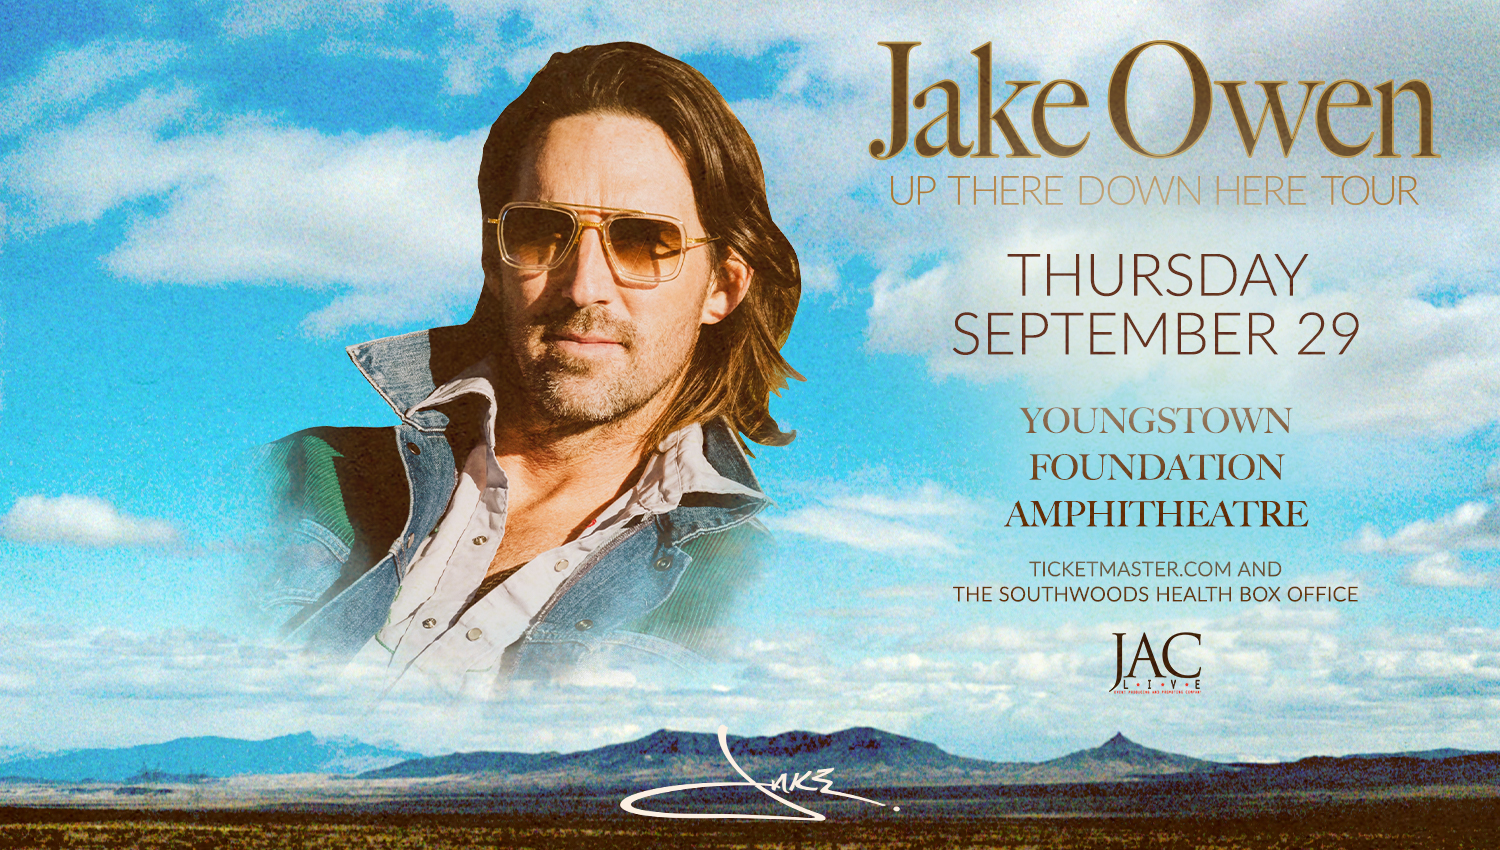 Jake Owen: Up There Down Here Tour.